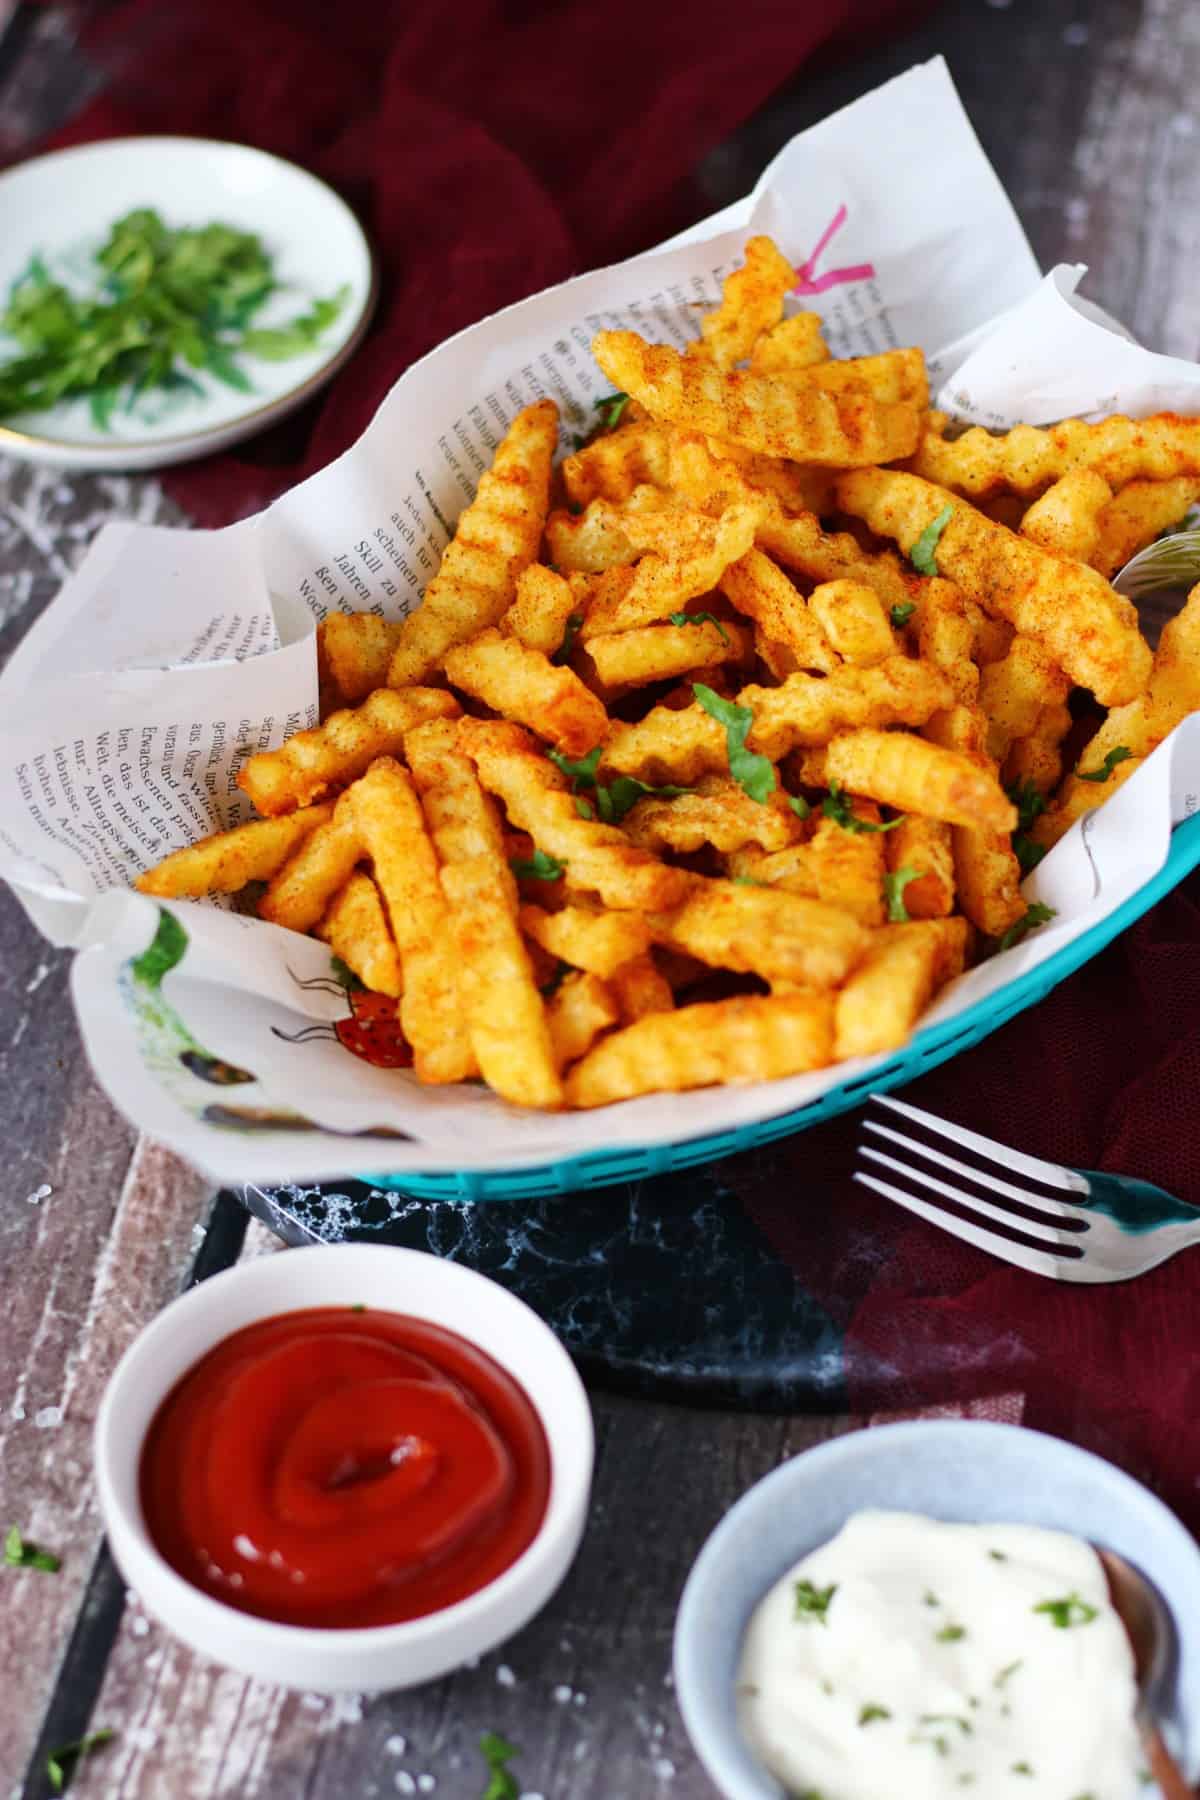 Masala fries in a basket lined with magazine paper and ketchup and mayo bowls on the front.